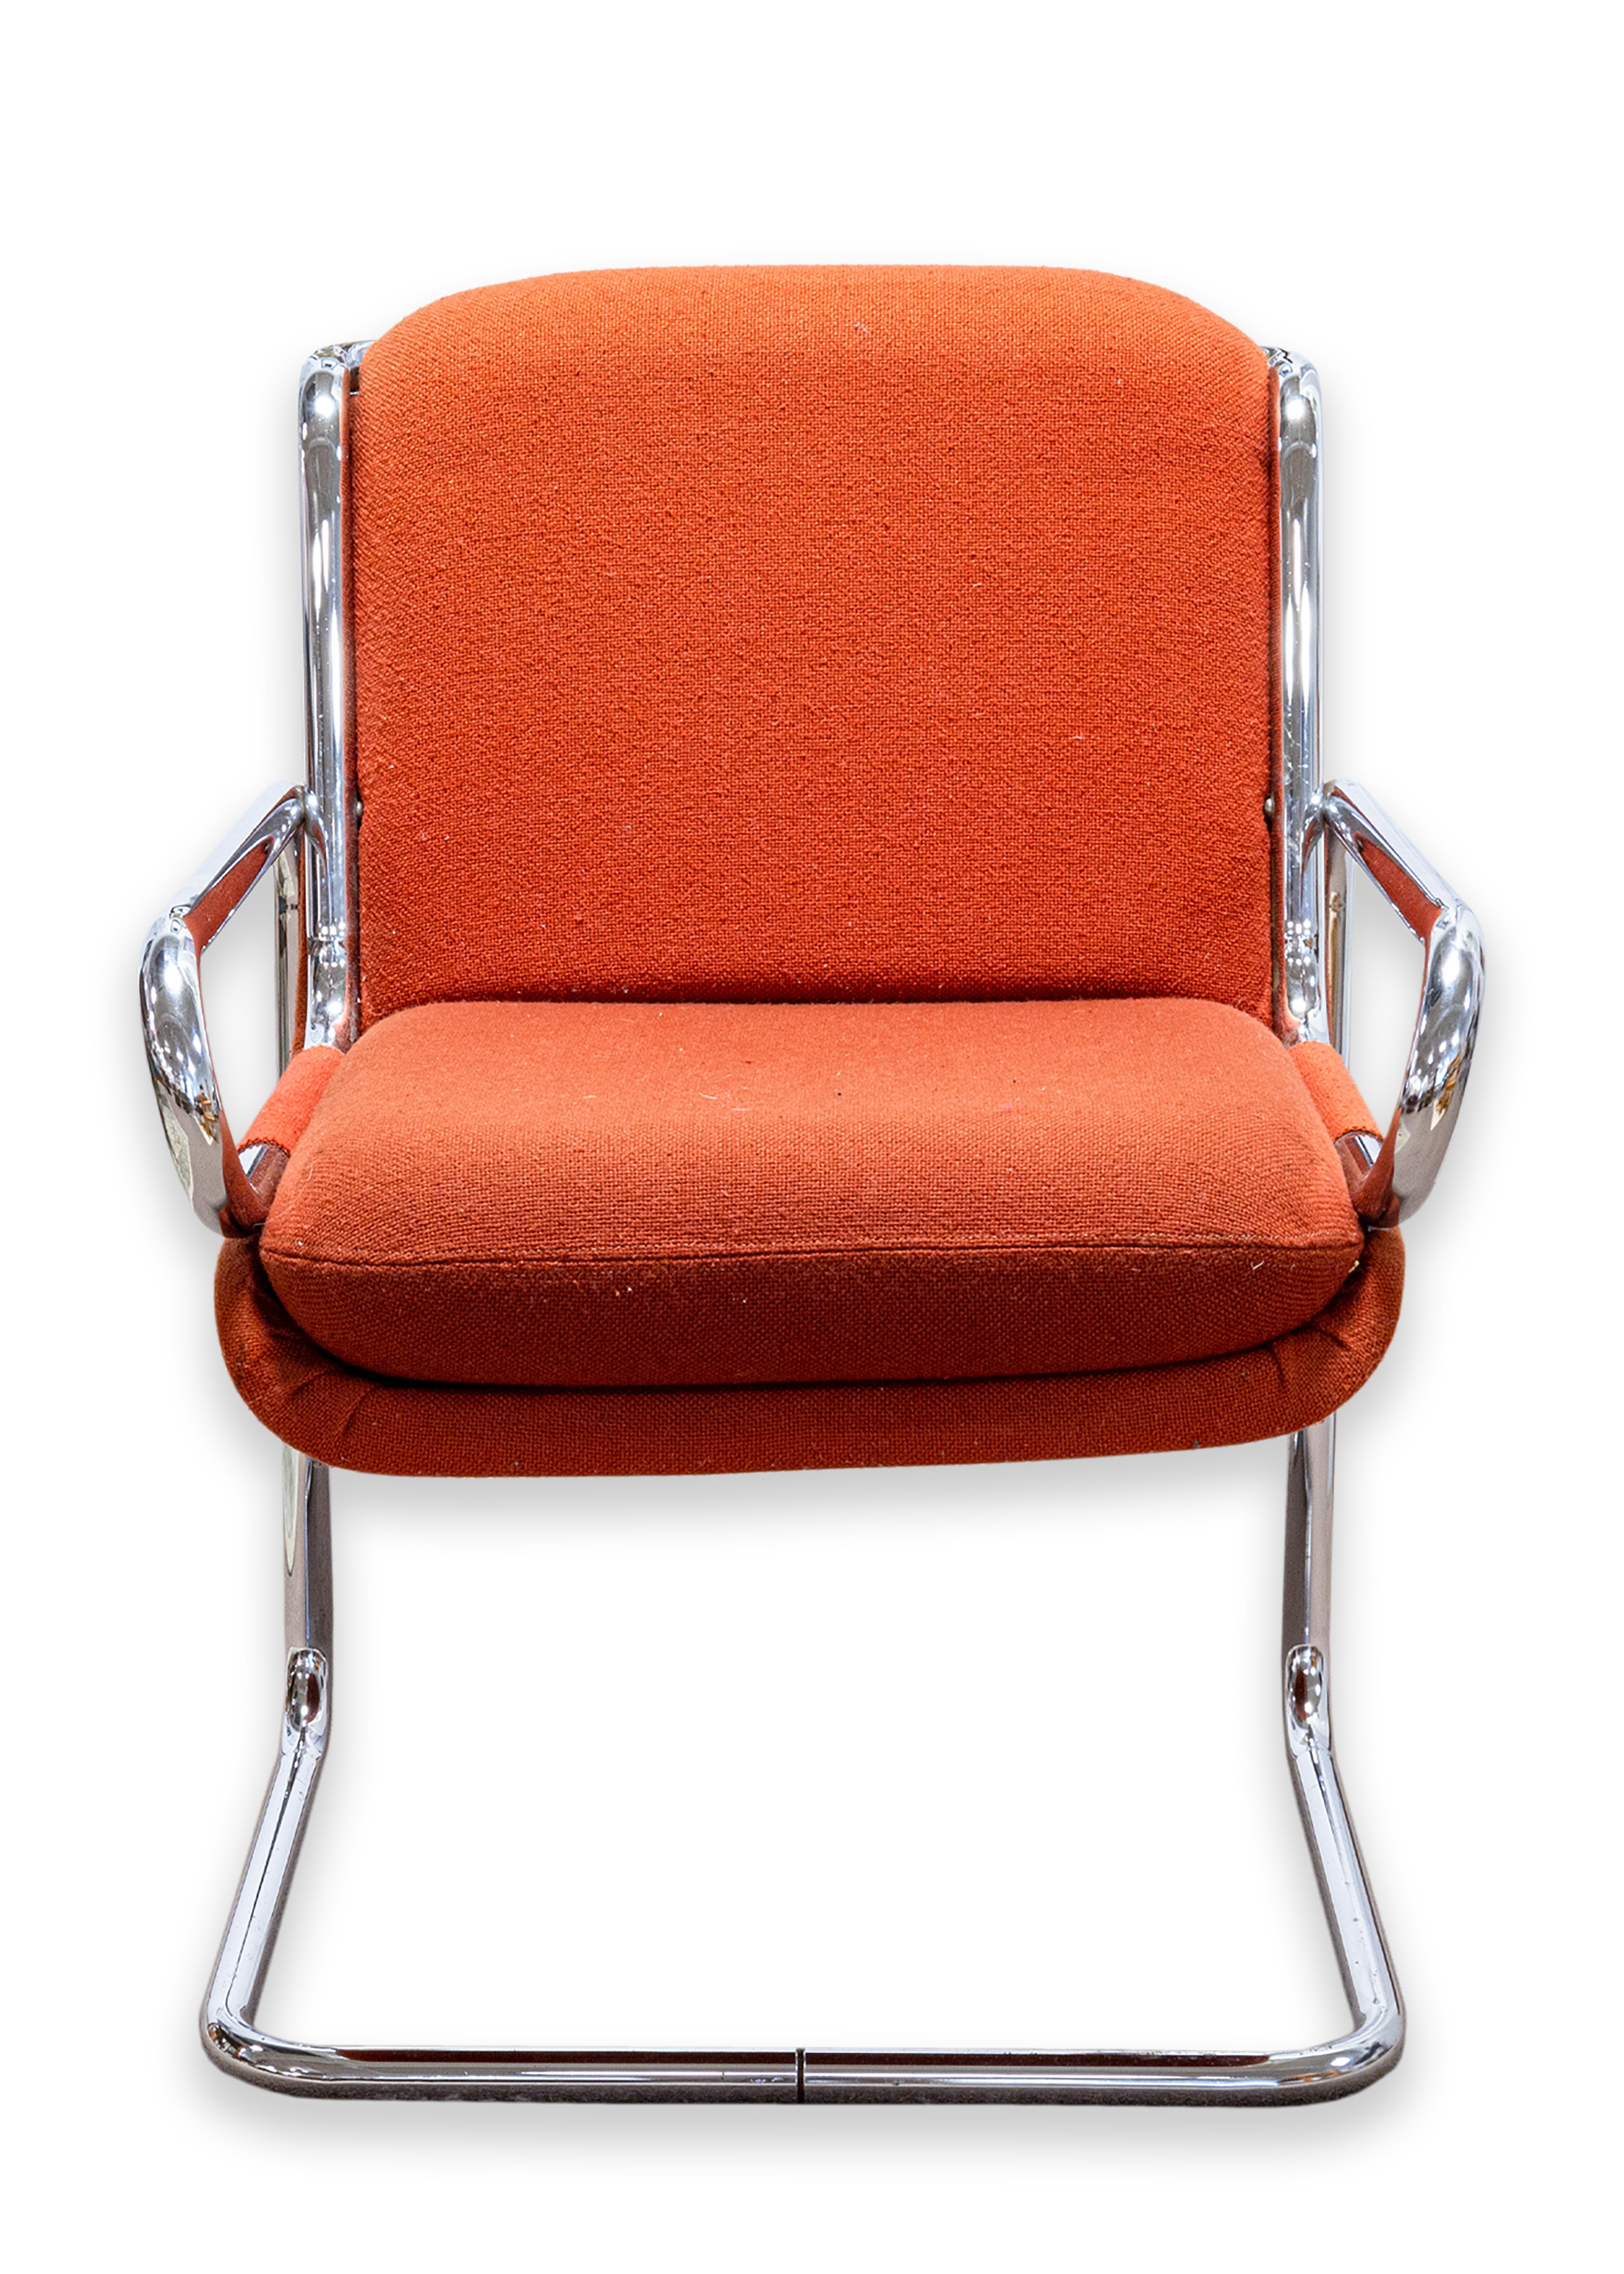 A rare chair prototype – the “Rye Chair” by Ralph Rye for Dunbar / Dux Furniture. Circa 1970. The frame is constructed with tubular stainless steel. This version has the cushion seat, upholstered in orange Knoll fabric, original to the prototype.